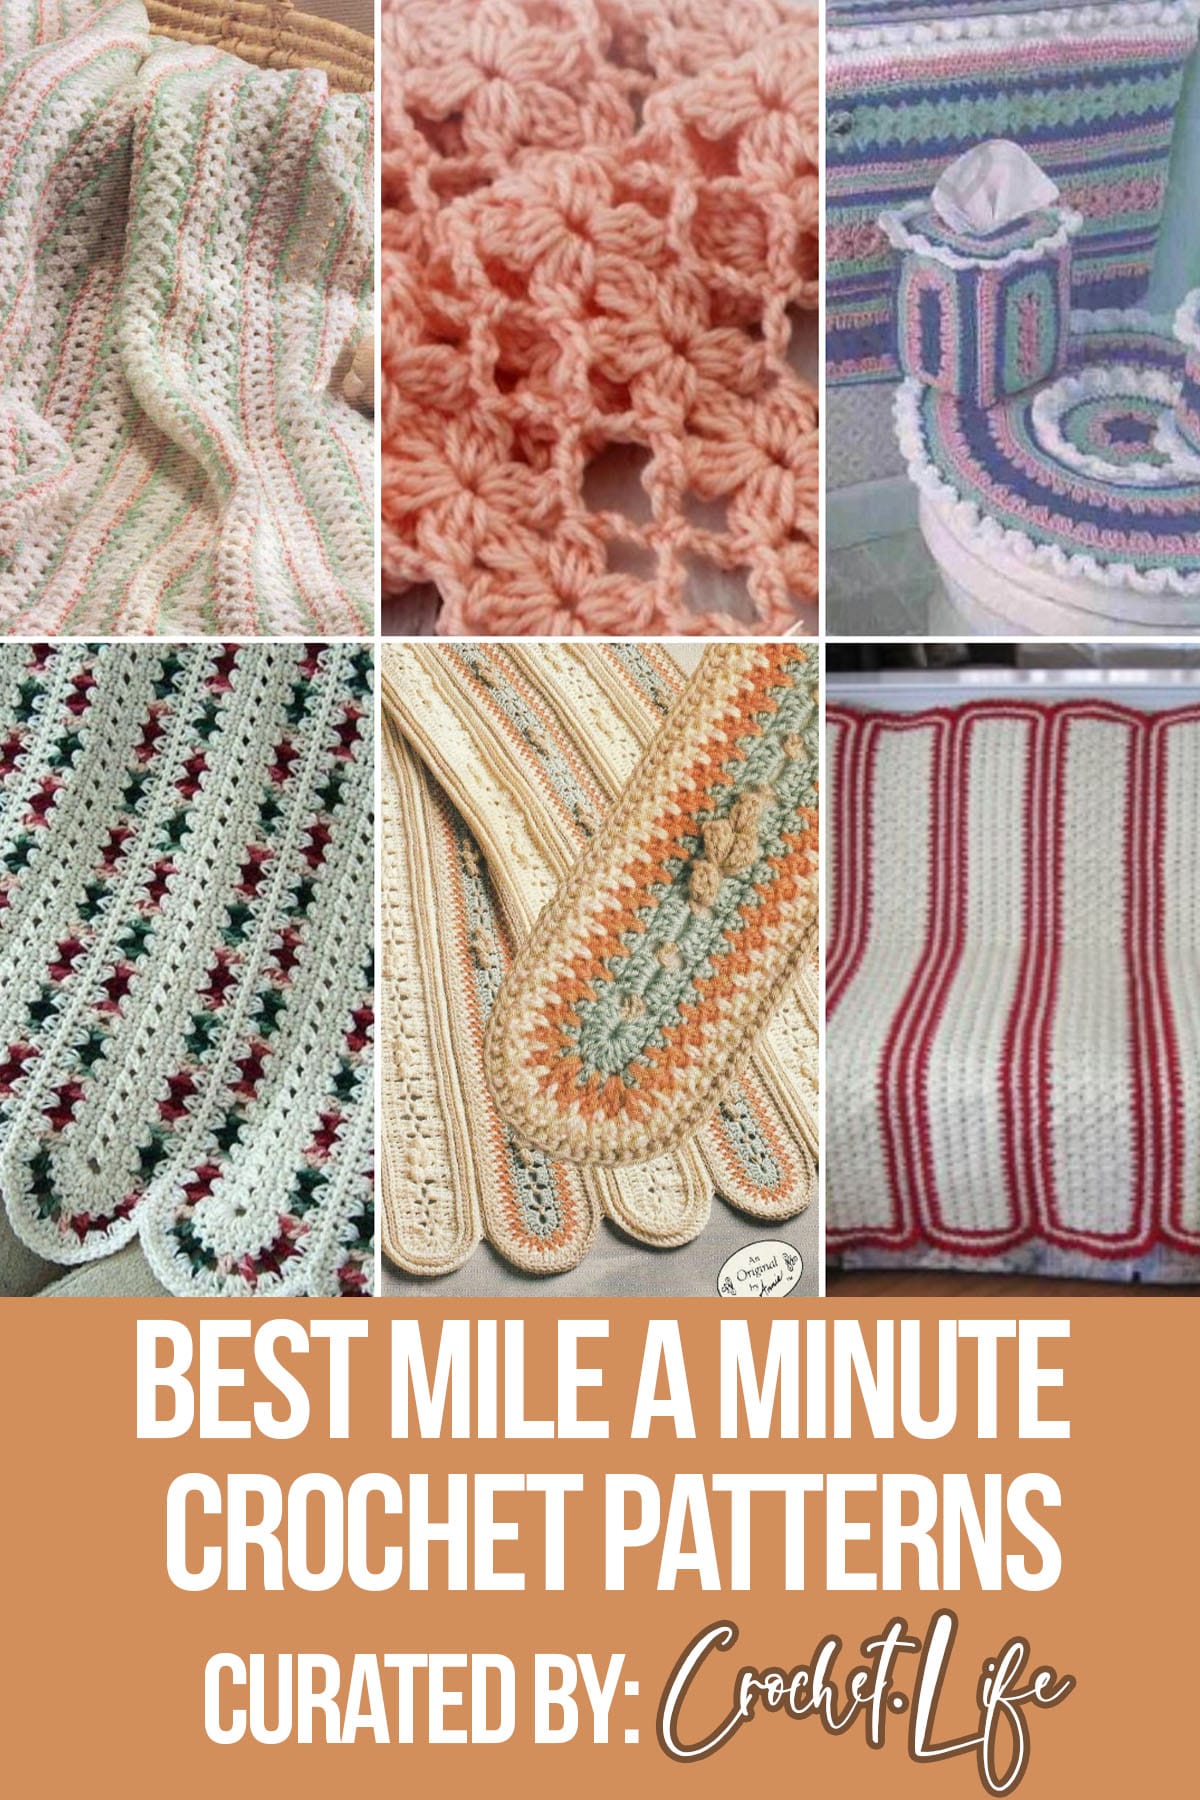 photo collage of beginner crochet patterns with text which reads best mile a minute crochet patterns curated by crochet.life